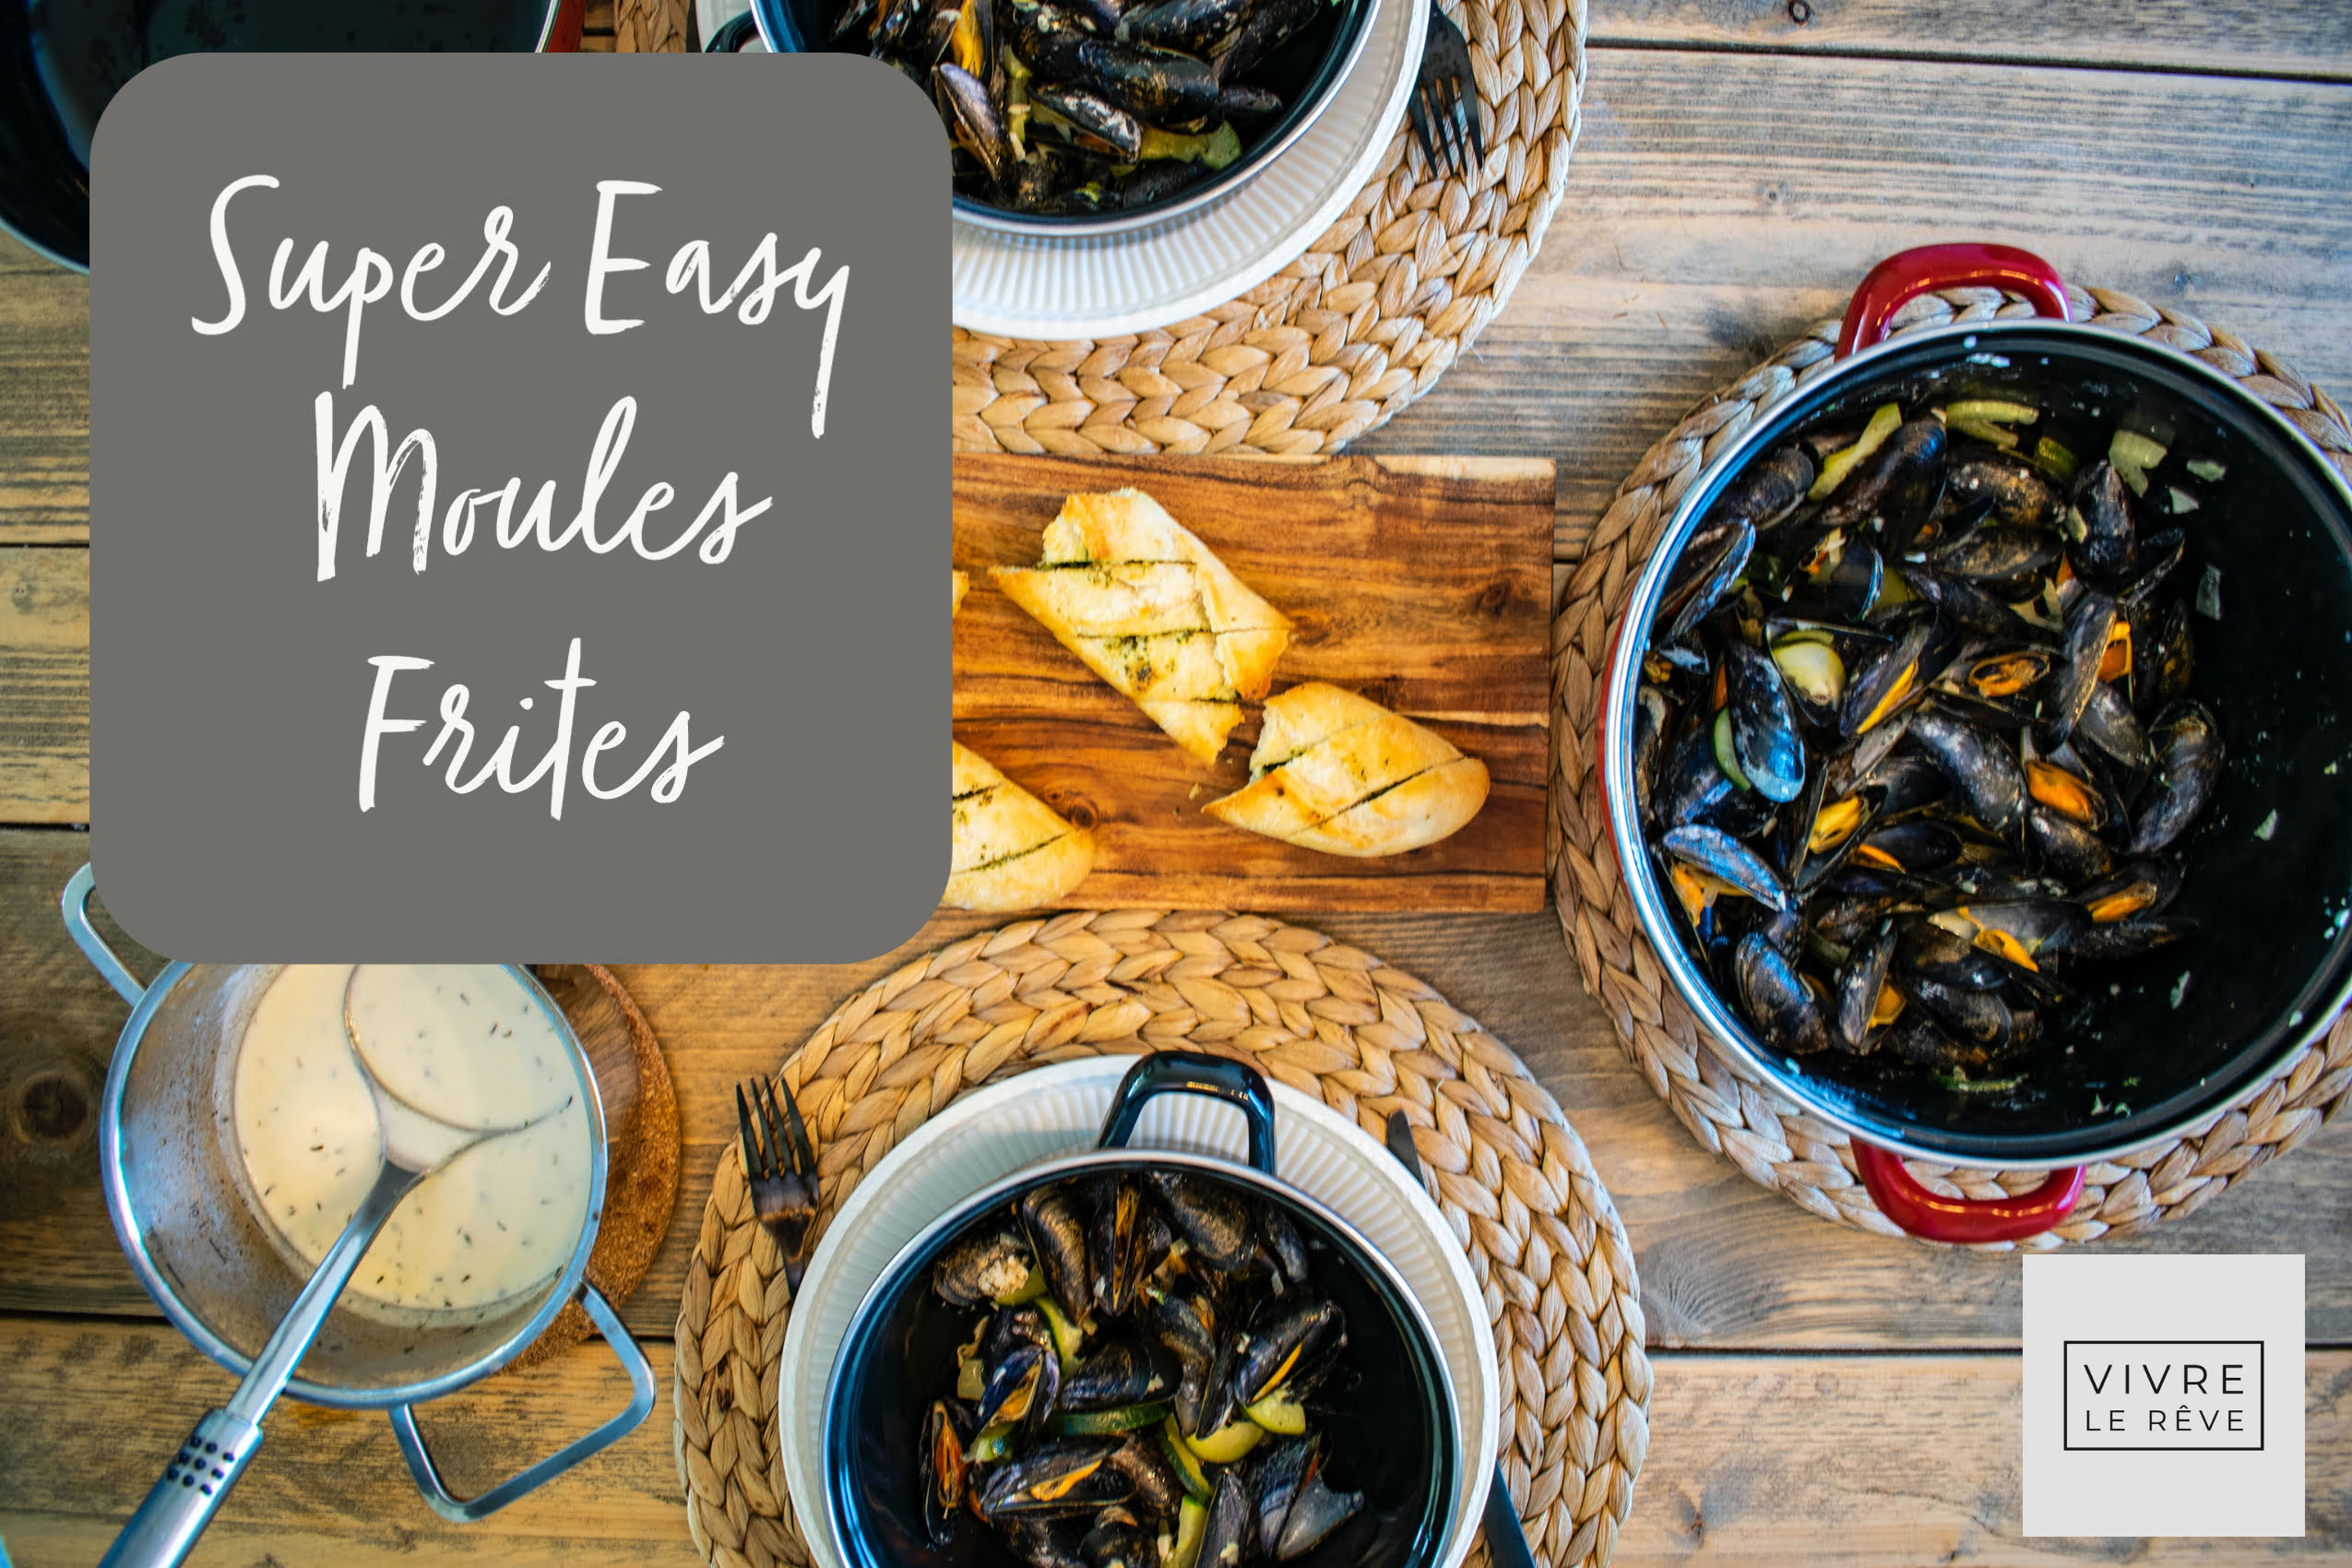 Super Easy Moules Frites